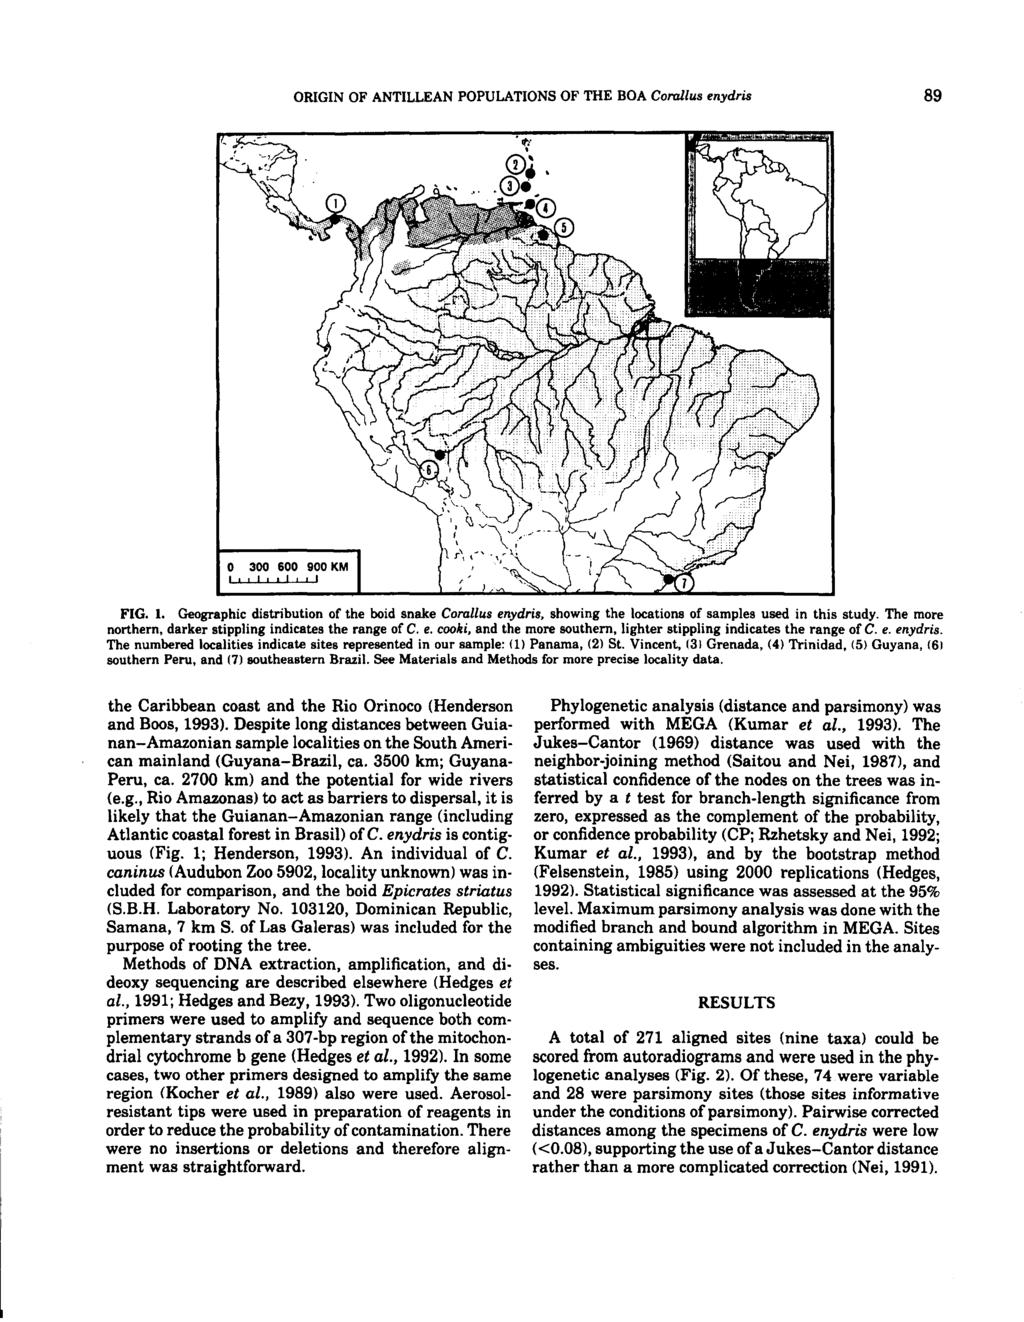 ORIGIN OF ANTILLEAN POPULATIONS OF THE BOA Corallus enydris 89 o 300 600 900 KM 1'1 1,1 I I I I FIG. 1. Geographic distribution of the boid snake Corallus enydris, showing the locations of samples used in this study.